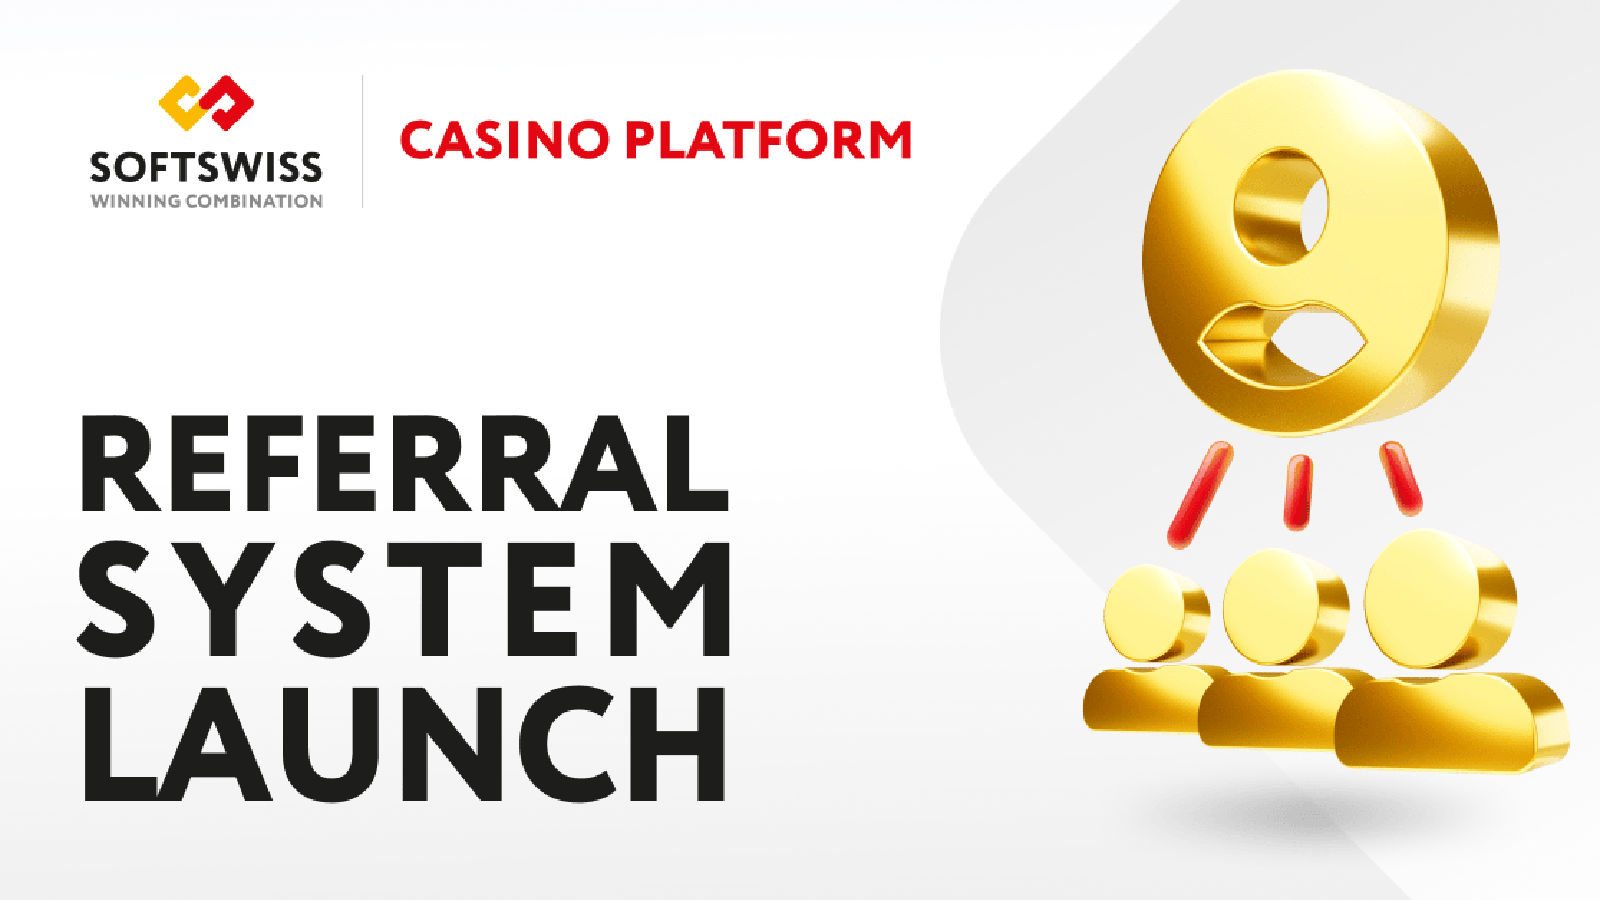 SOFTSWISS Casino Launches Referral System